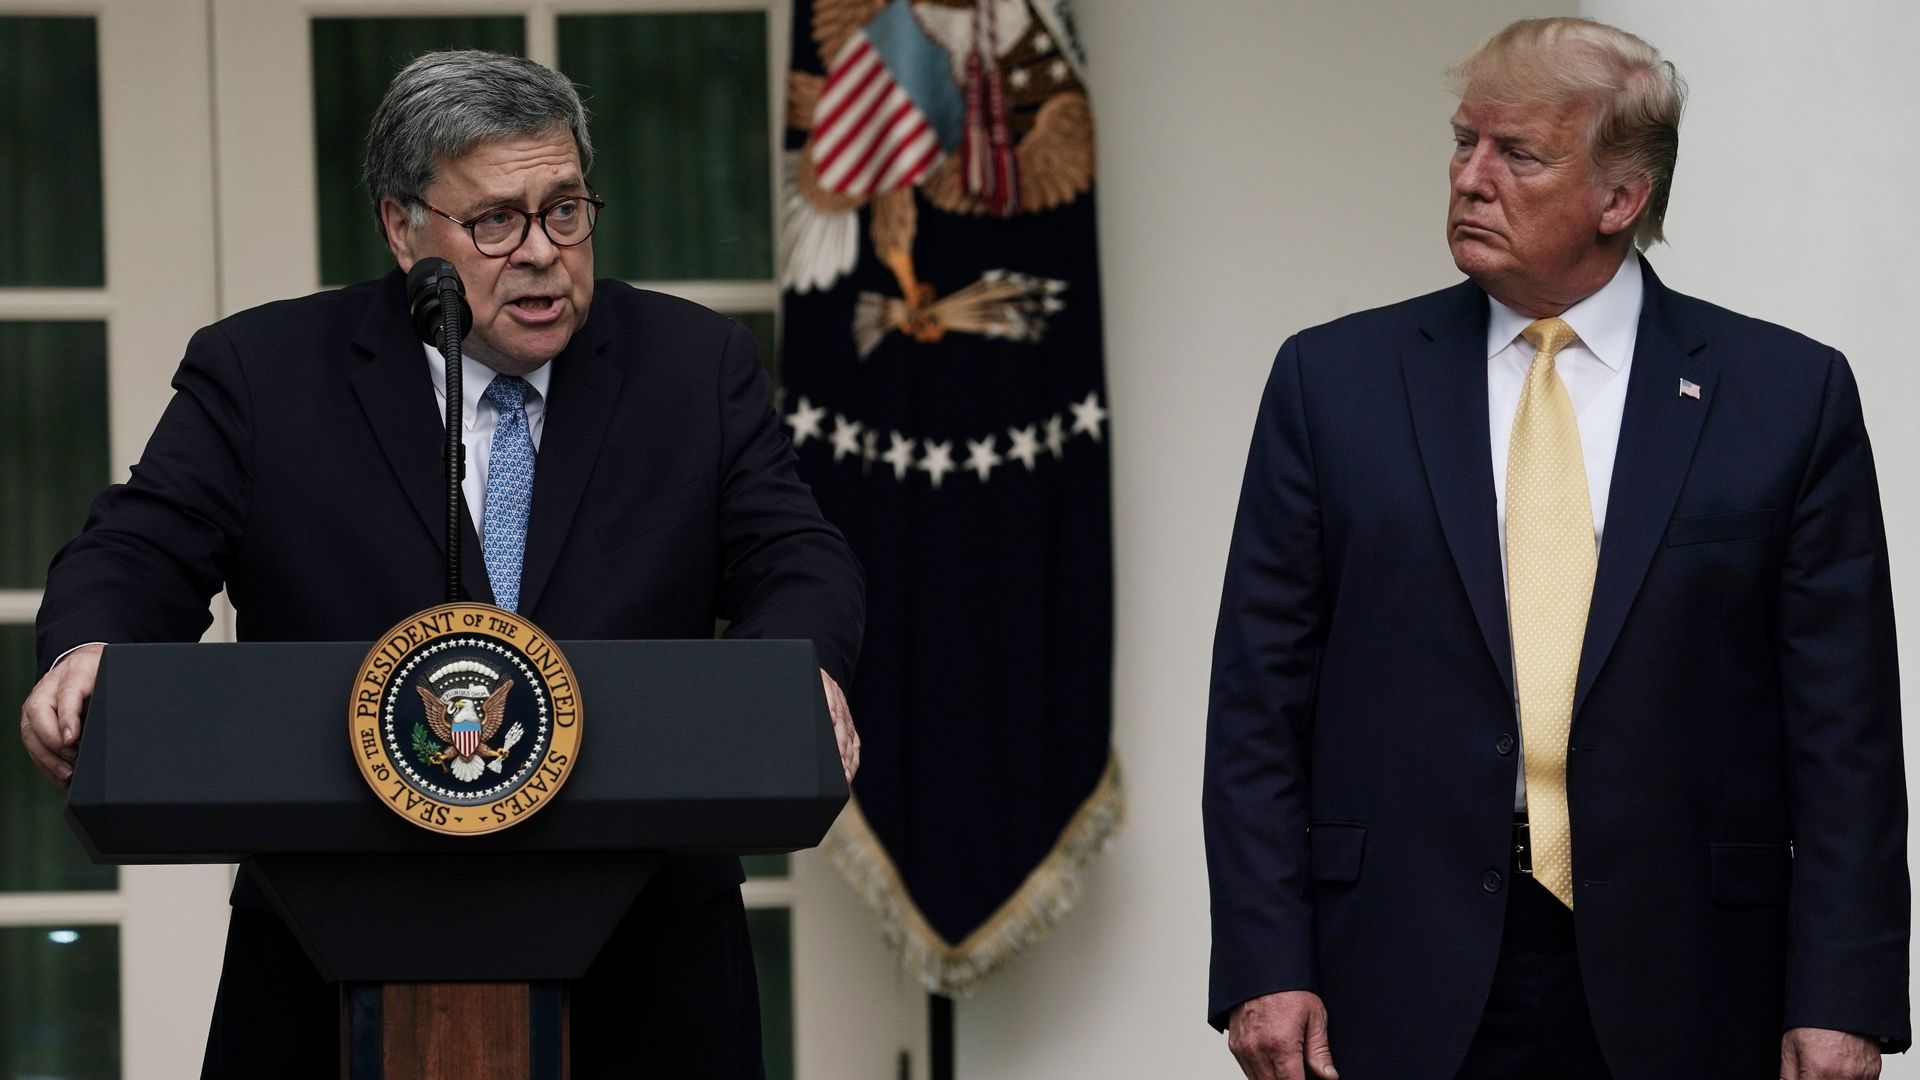 Attorney General William Barr speaks as President Donald Trump looks on during a Rose Garden statement on the census July 11